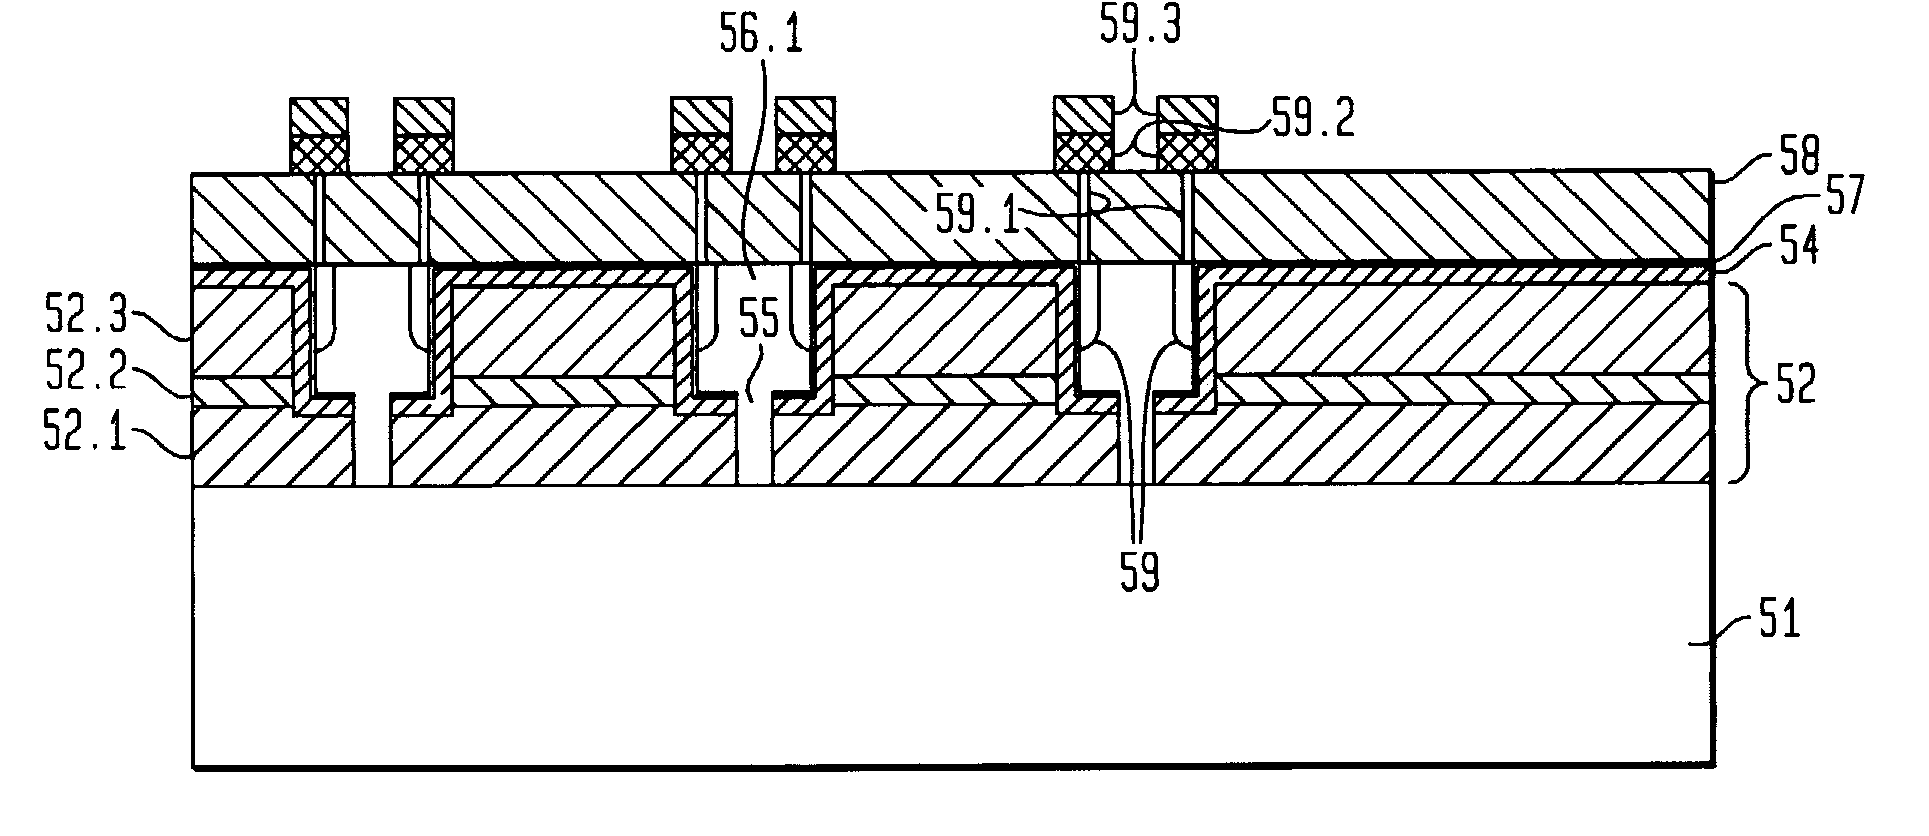 Semiconductor devices with reduced active region defects and unique contacting schemes